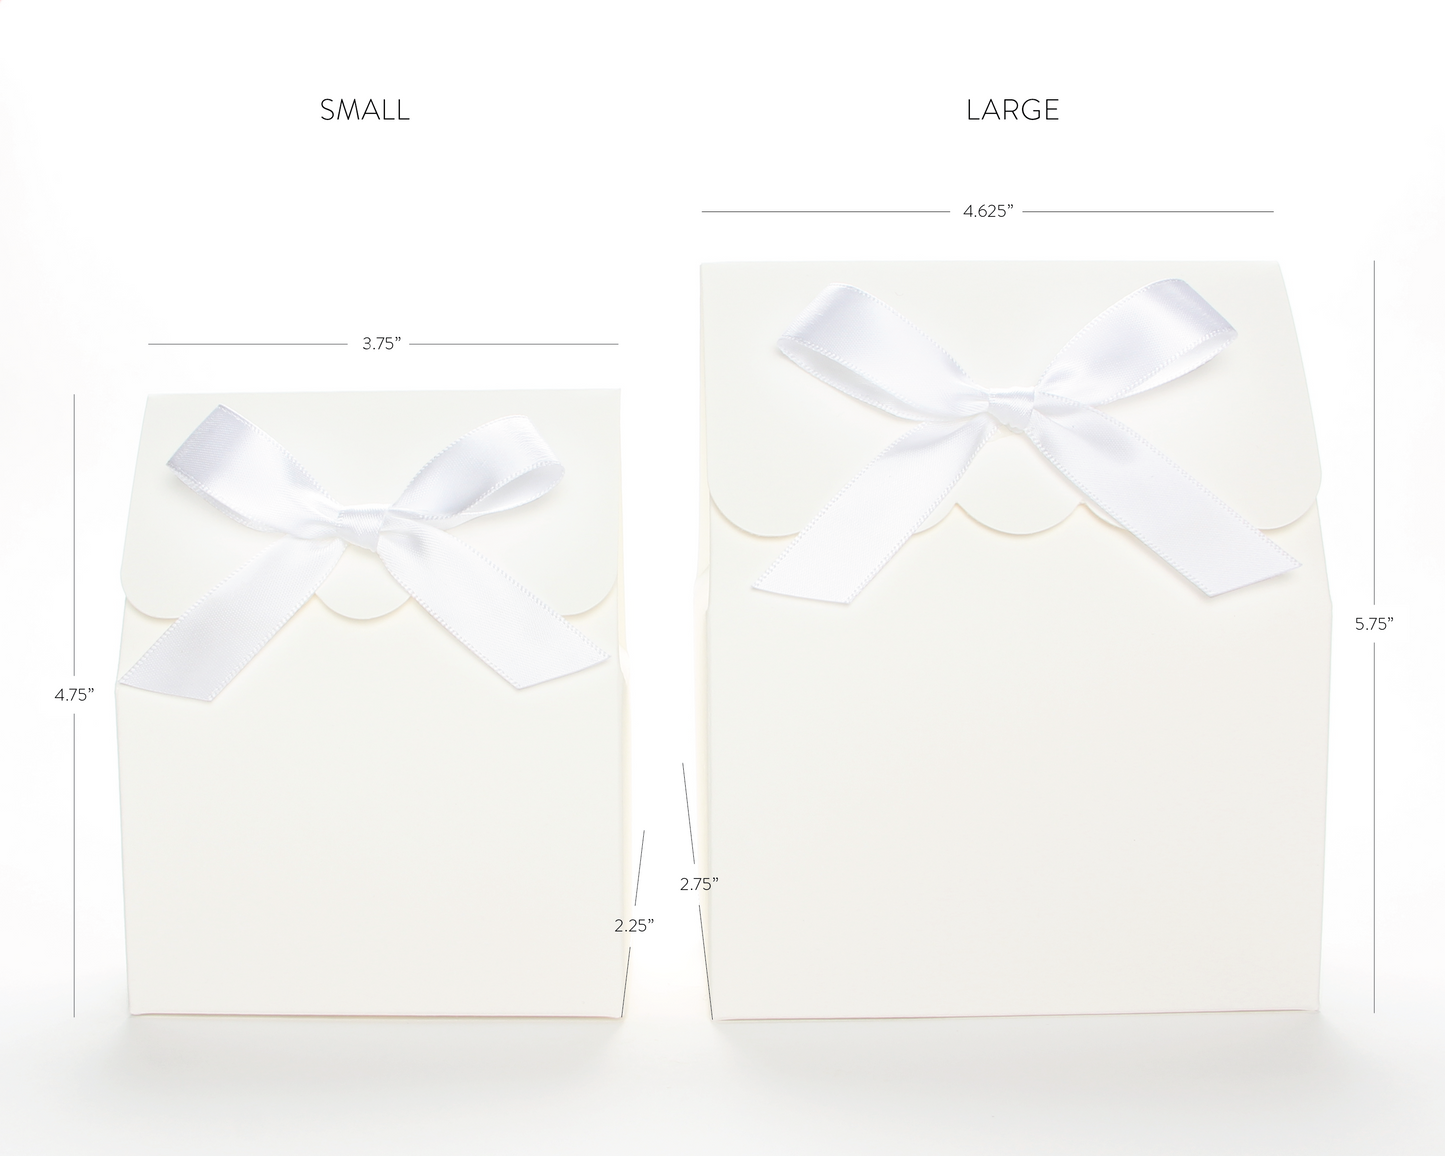 Lux Party’s small white favor box and large white favor box, side by side, showing dimensions of each.